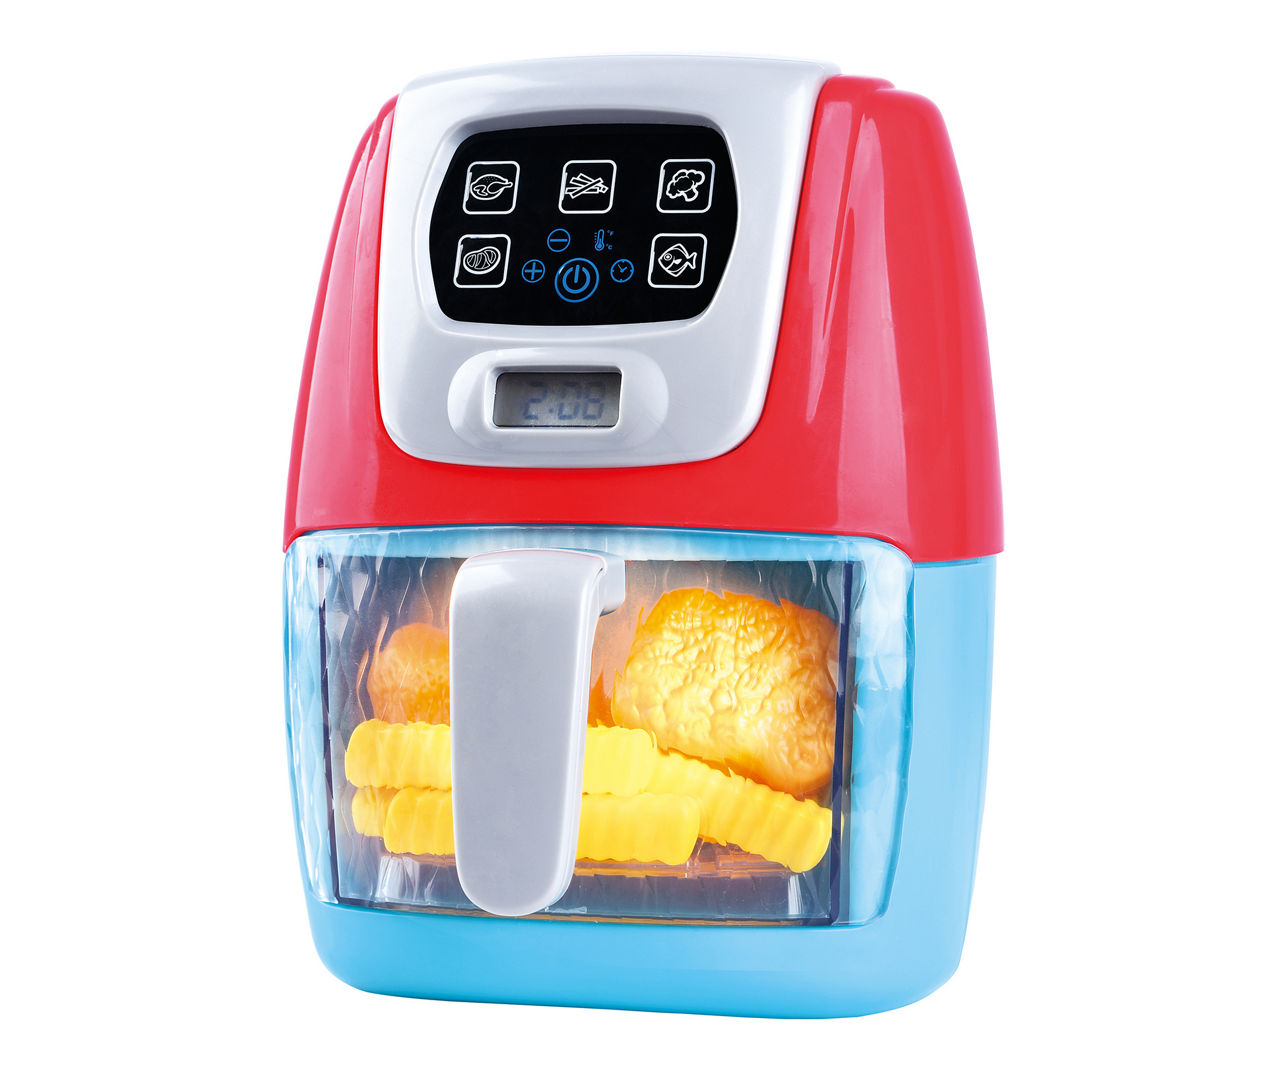  Toy Air Fryer, Play Kitchen Accessories Set for